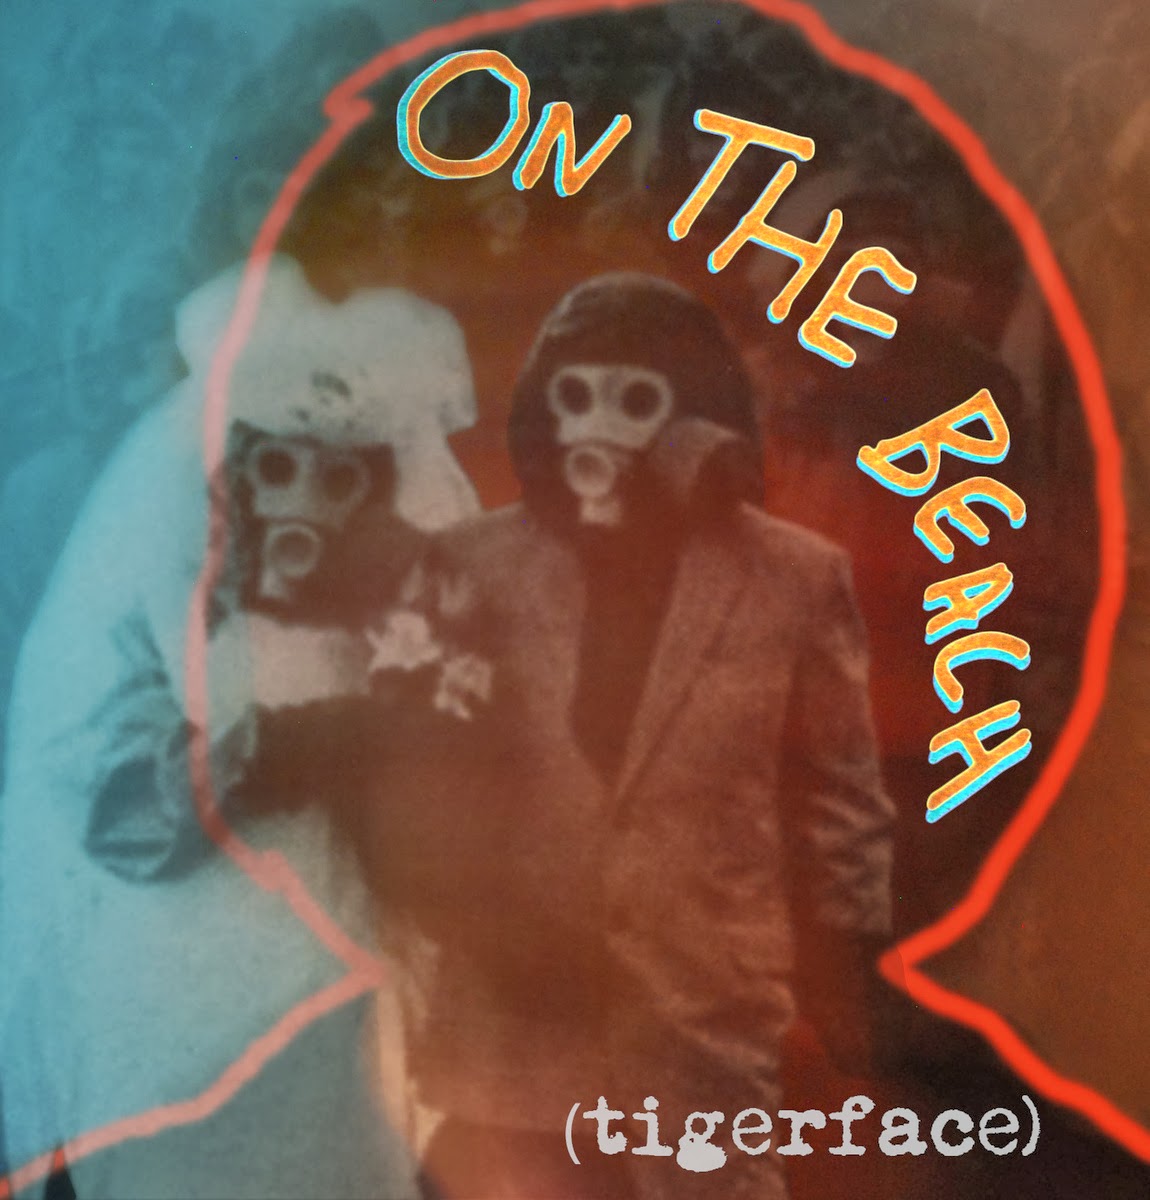 Tigerface - EP - "On The Beach" - Leaves You Wanting More